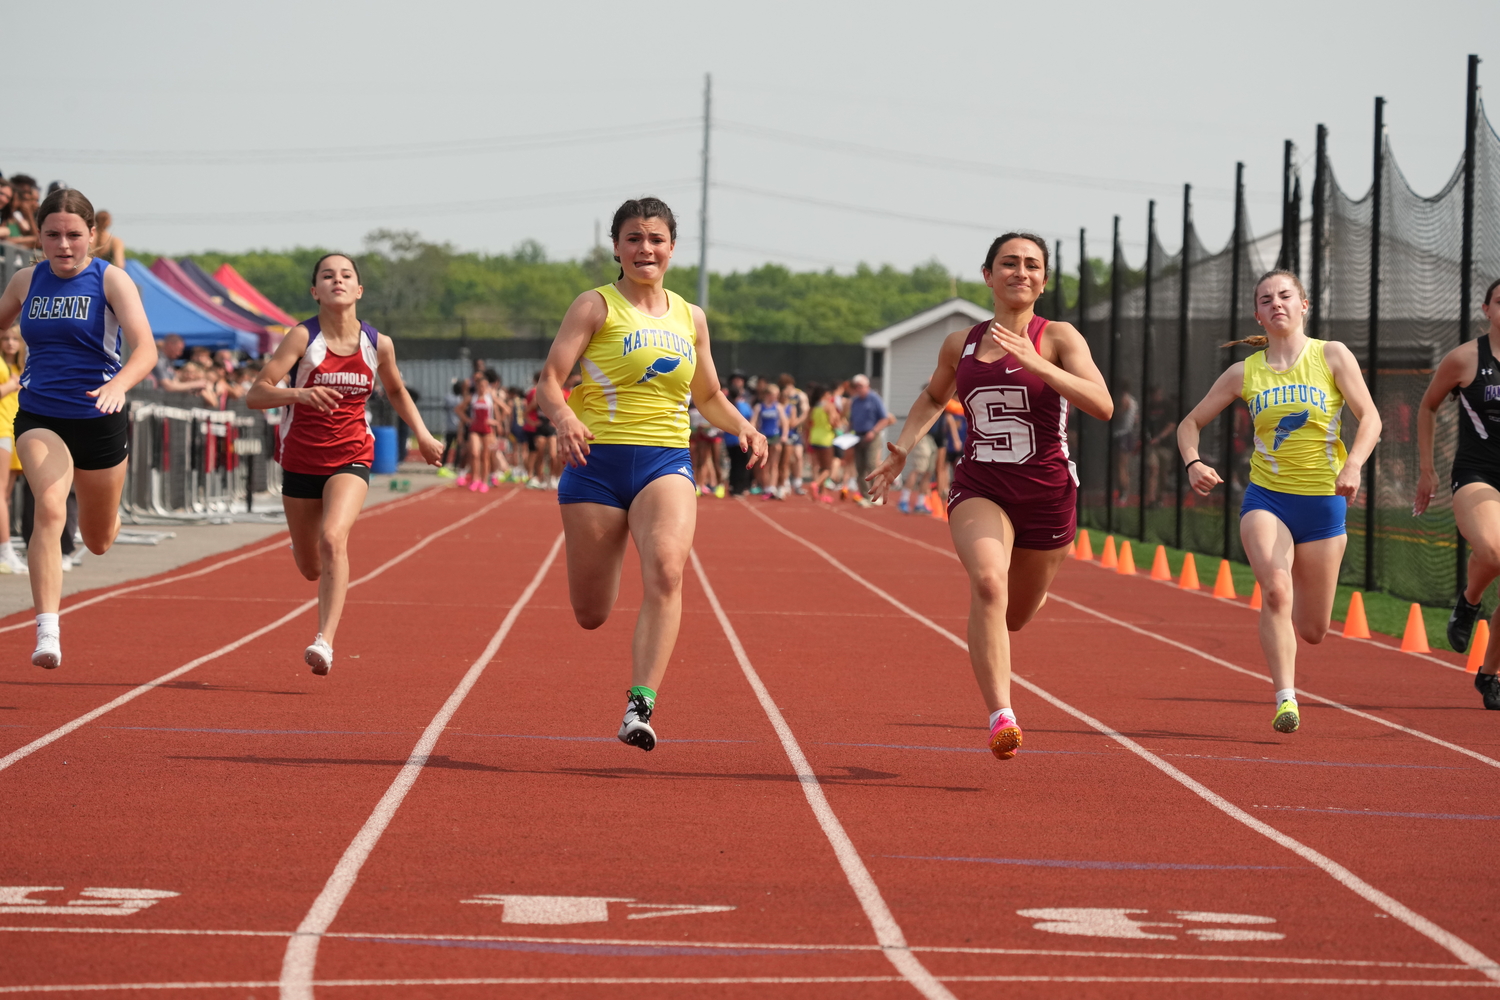 Southampton junior Kyla Cerullo races toward the finish line in the 100-meter dash in which she placed fourth.   RON ESPOSITO